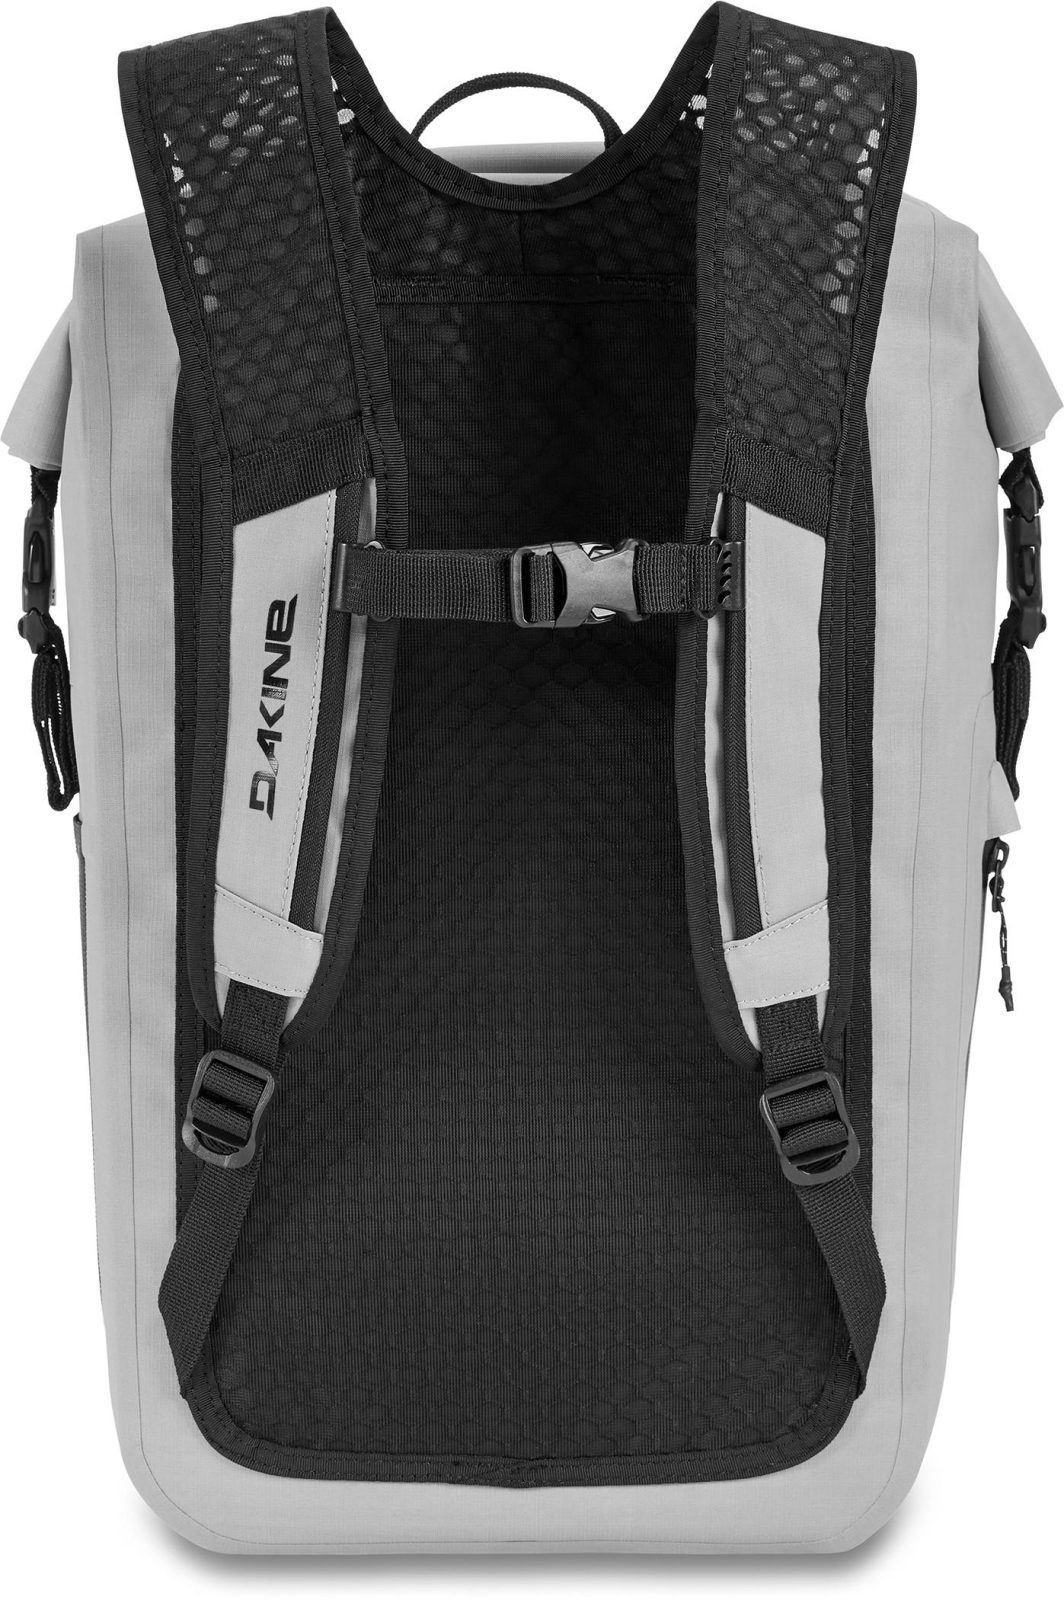 CYCLONE ROLL TOP PACK 32L GRIFFIN - ARMA outdoor